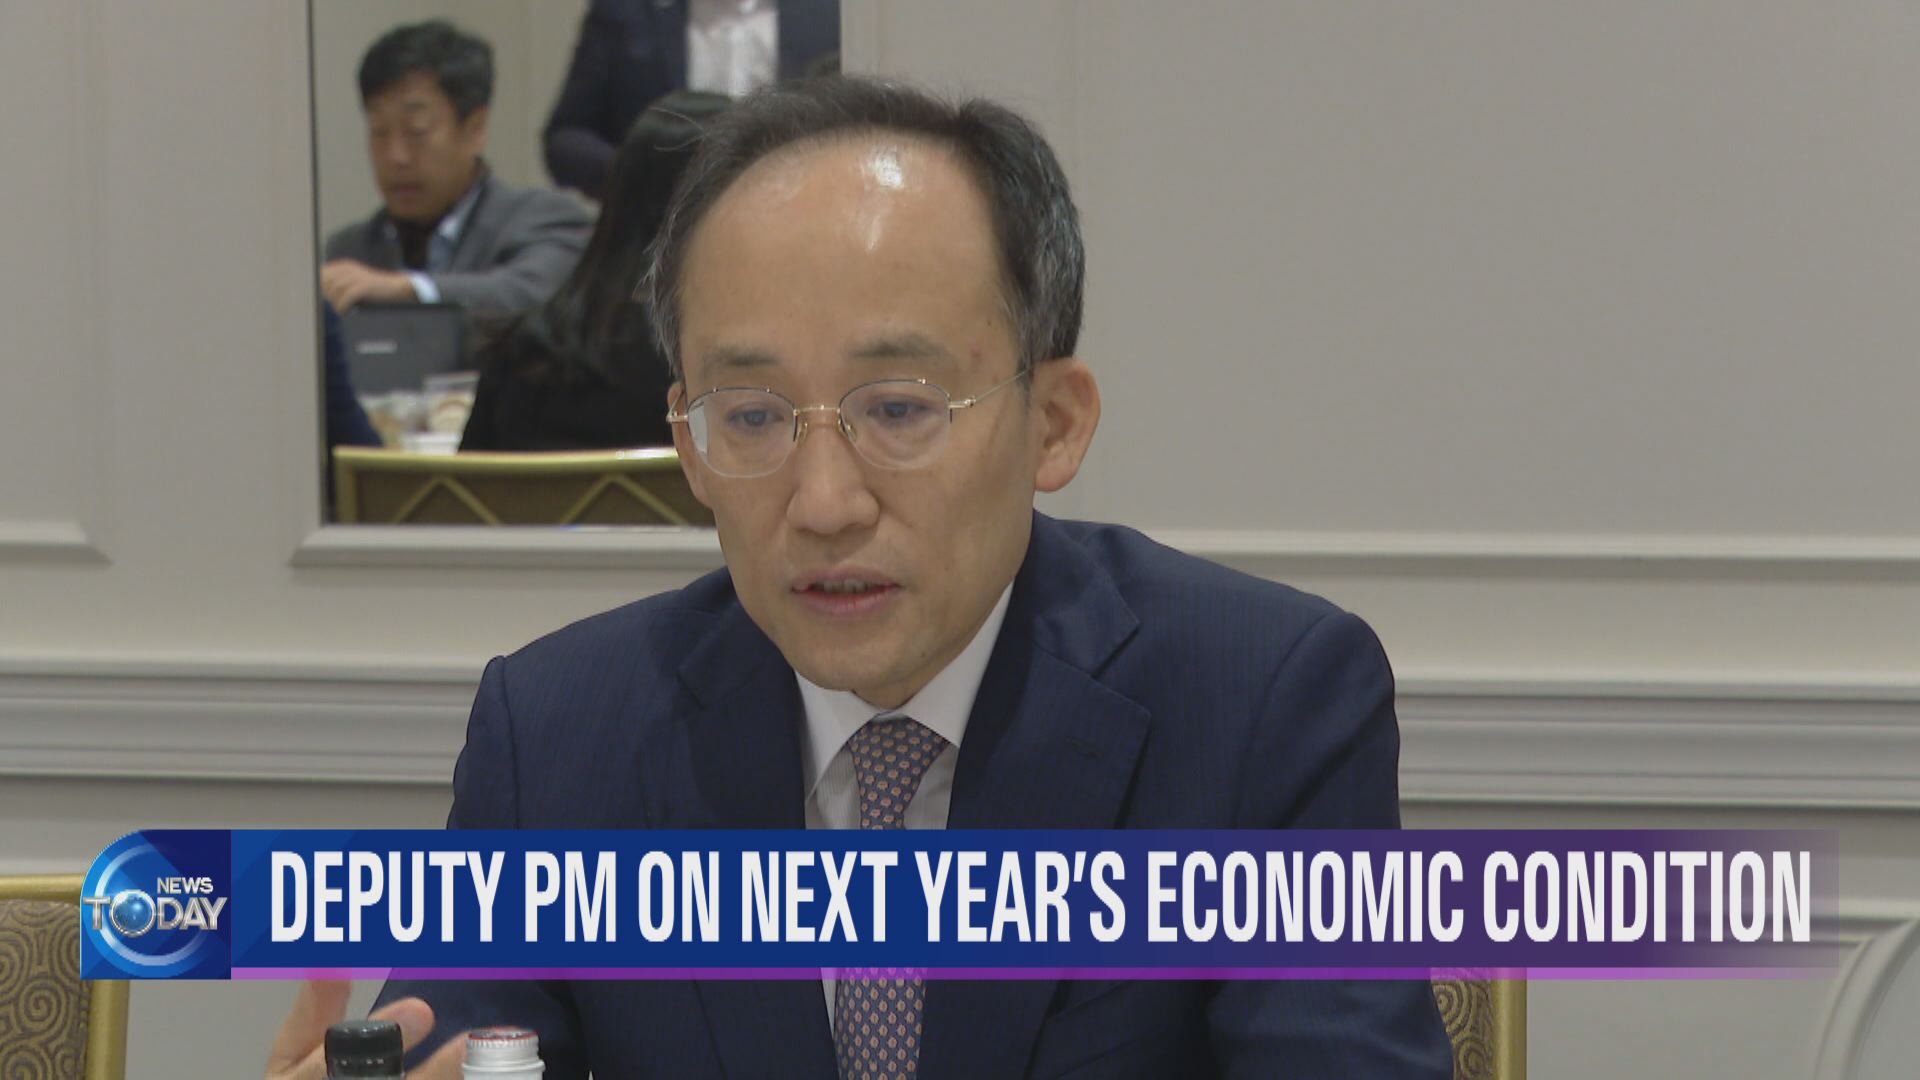 DEPUTY PM ON NEXT YEAR’S ECONOMIC CONDITION